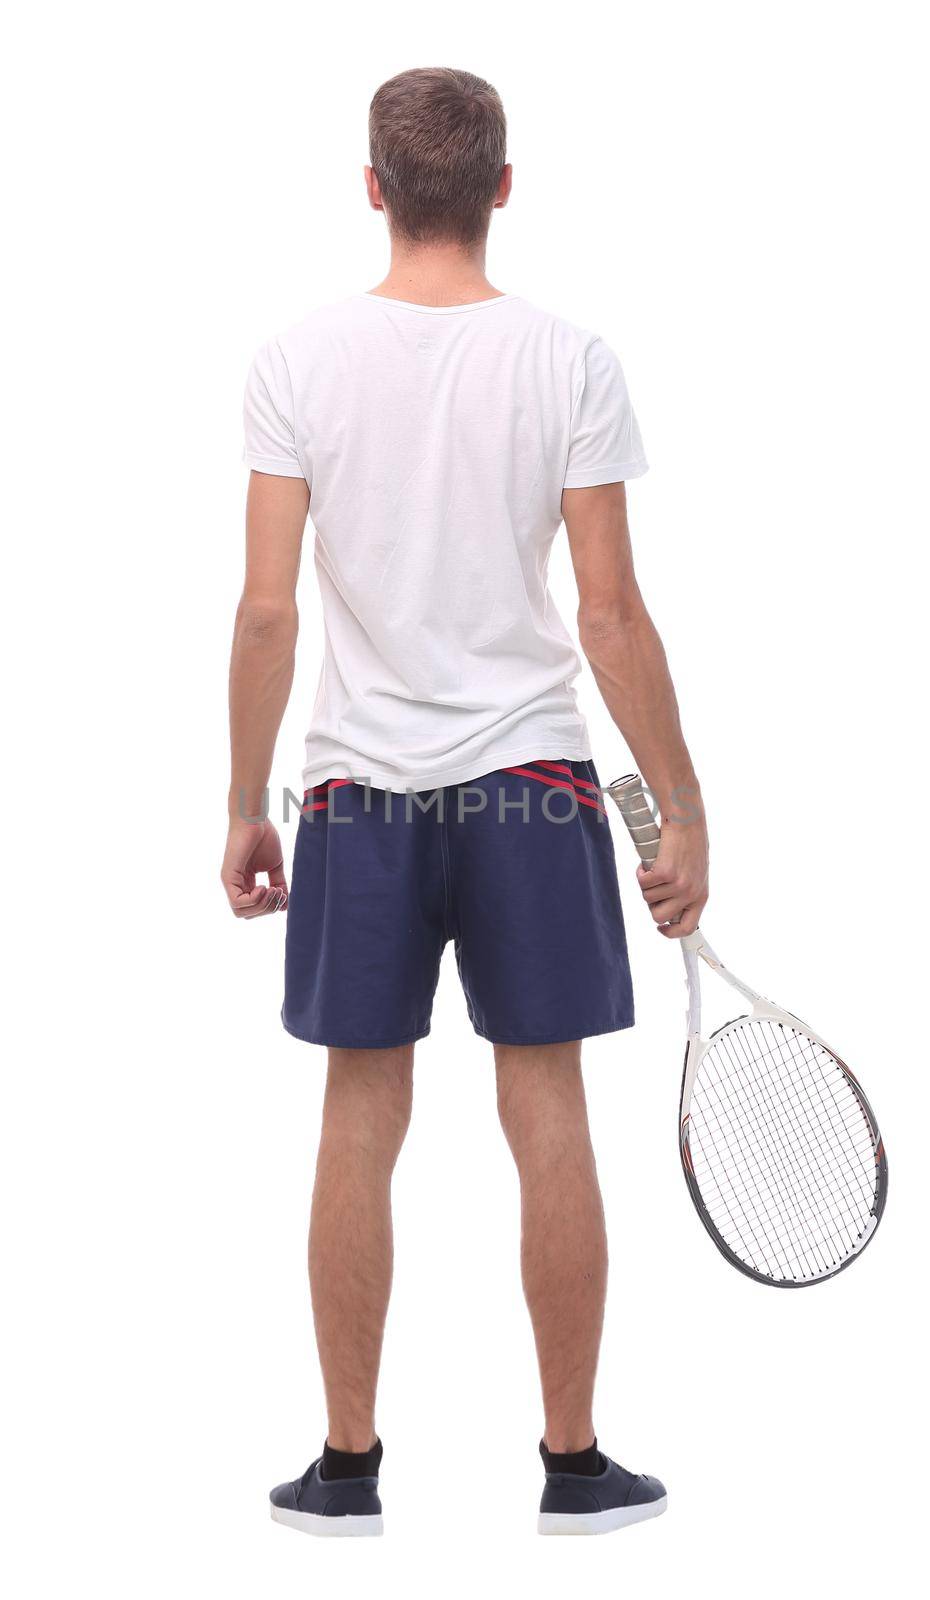 rear view. a young man with a tennis racket. isolated on white background